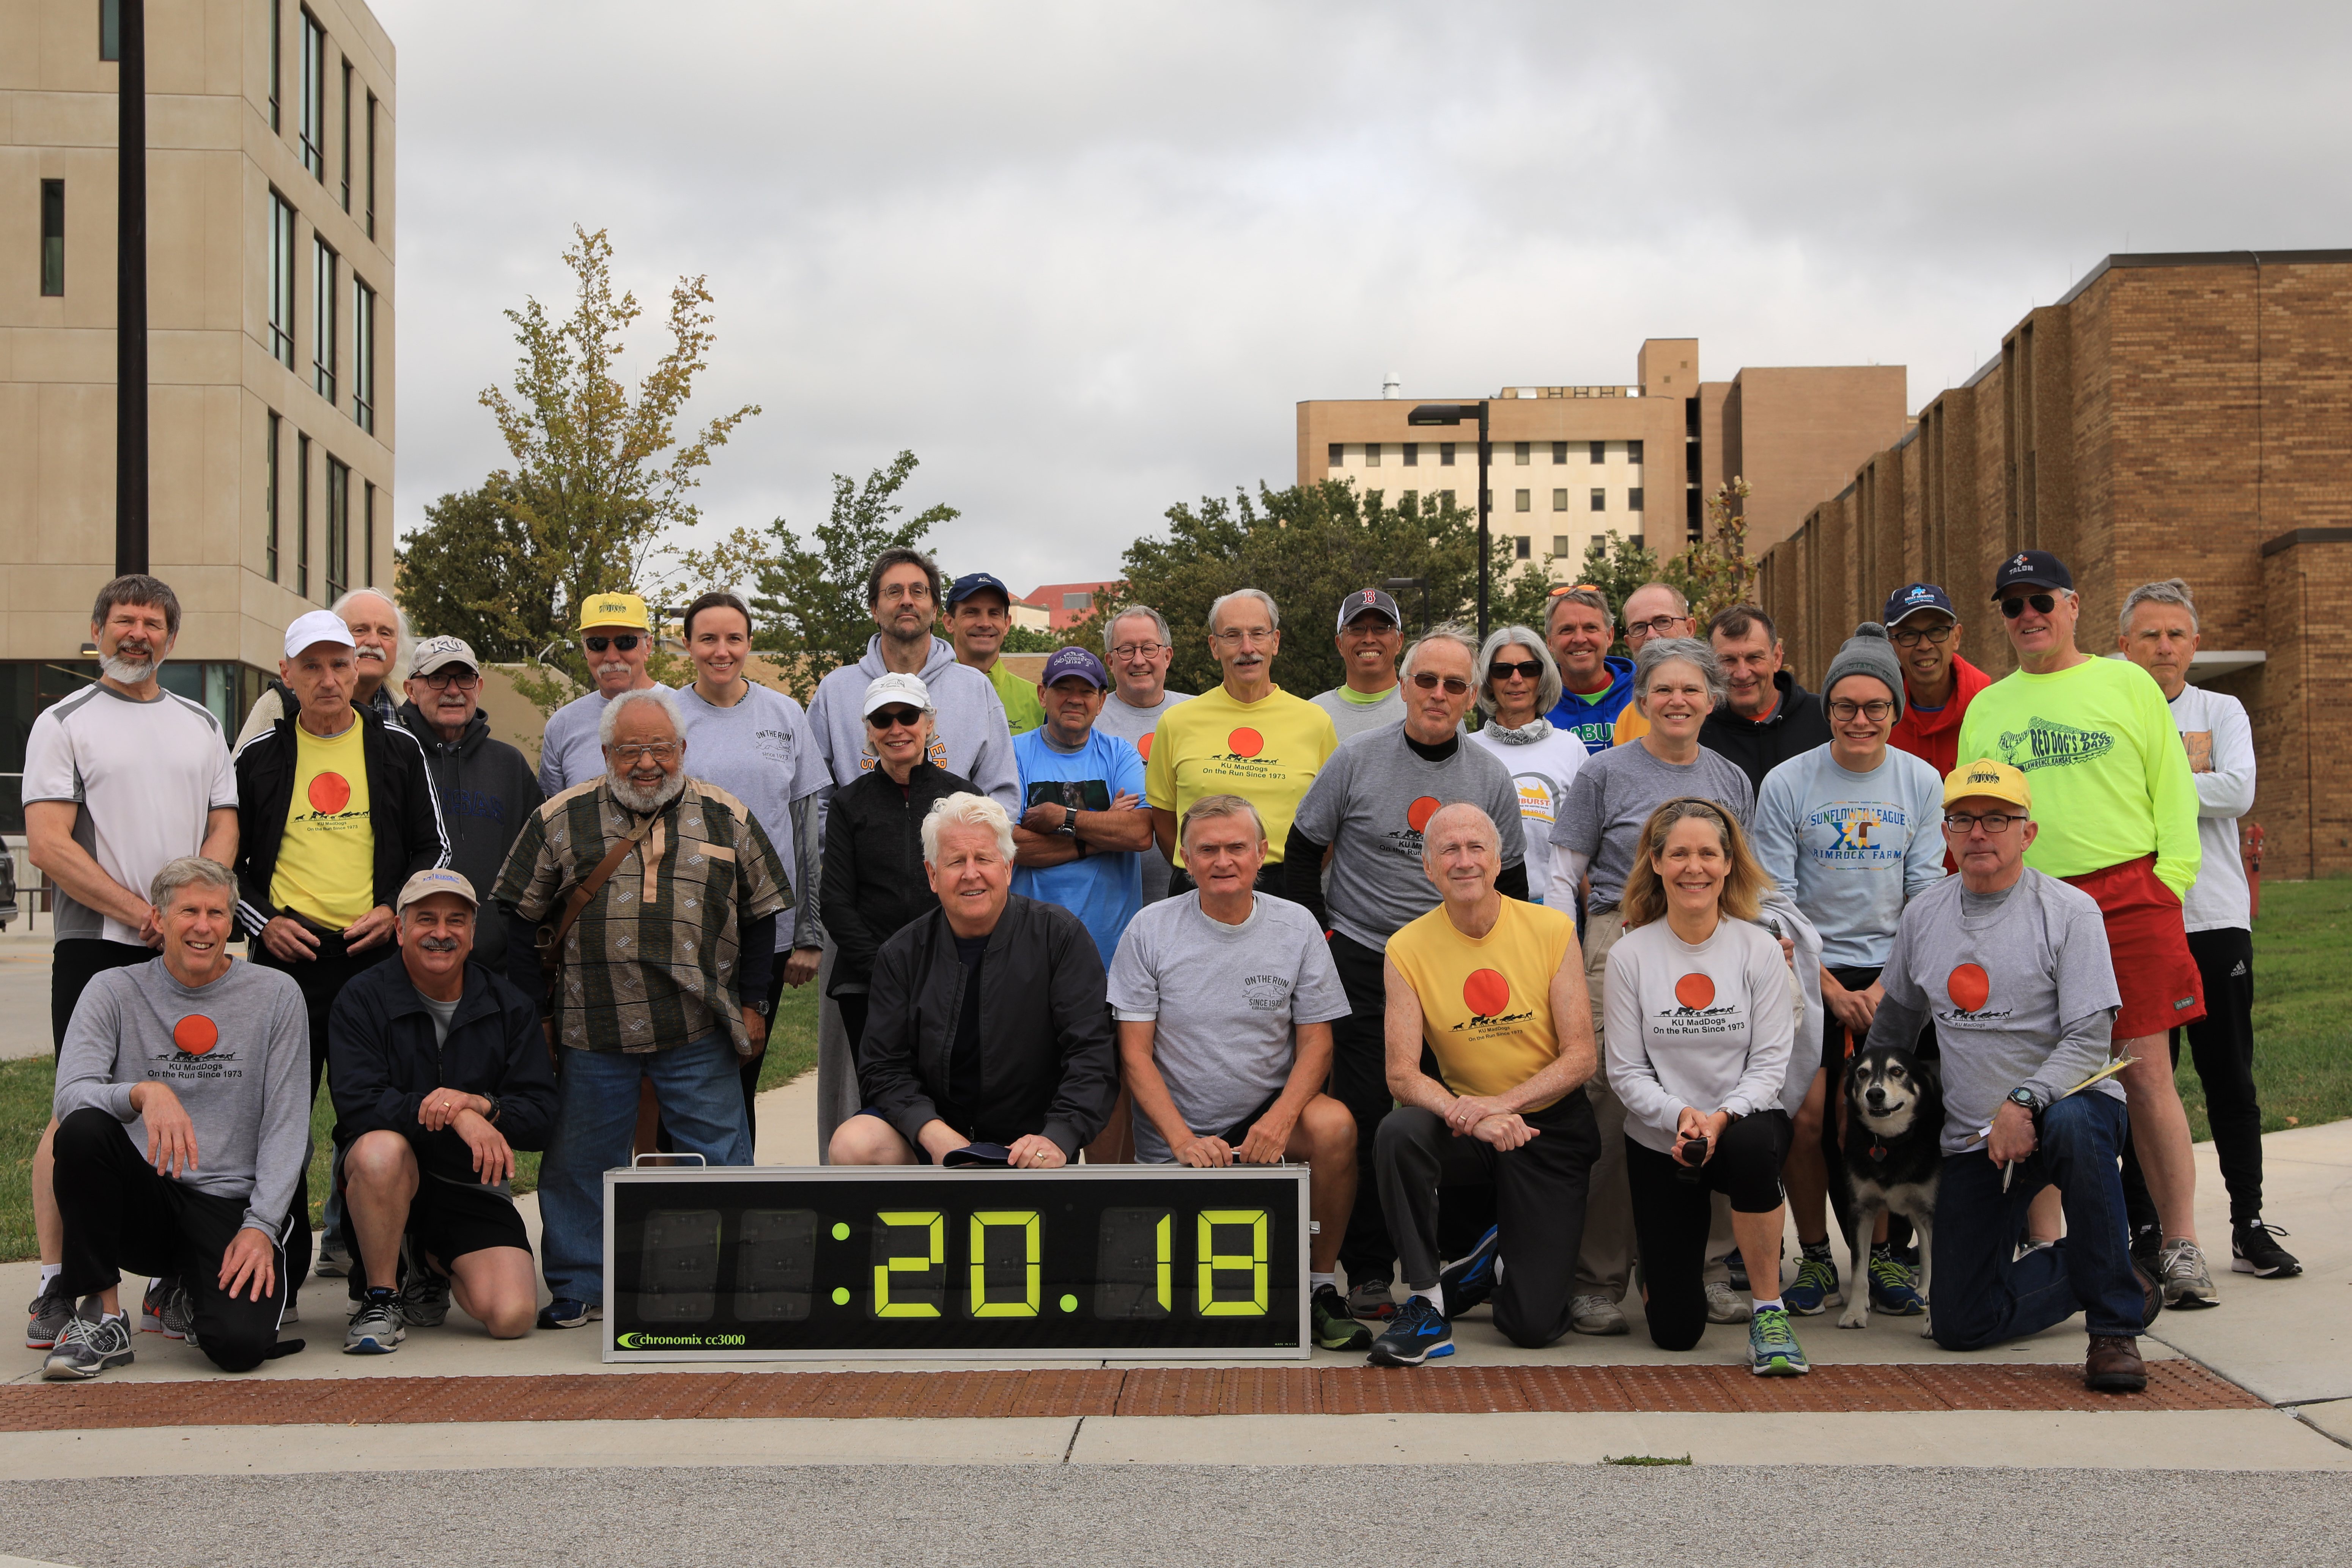 Group photo of the Mad Dogs at the Oct 13th John Bunce Memorial Run.